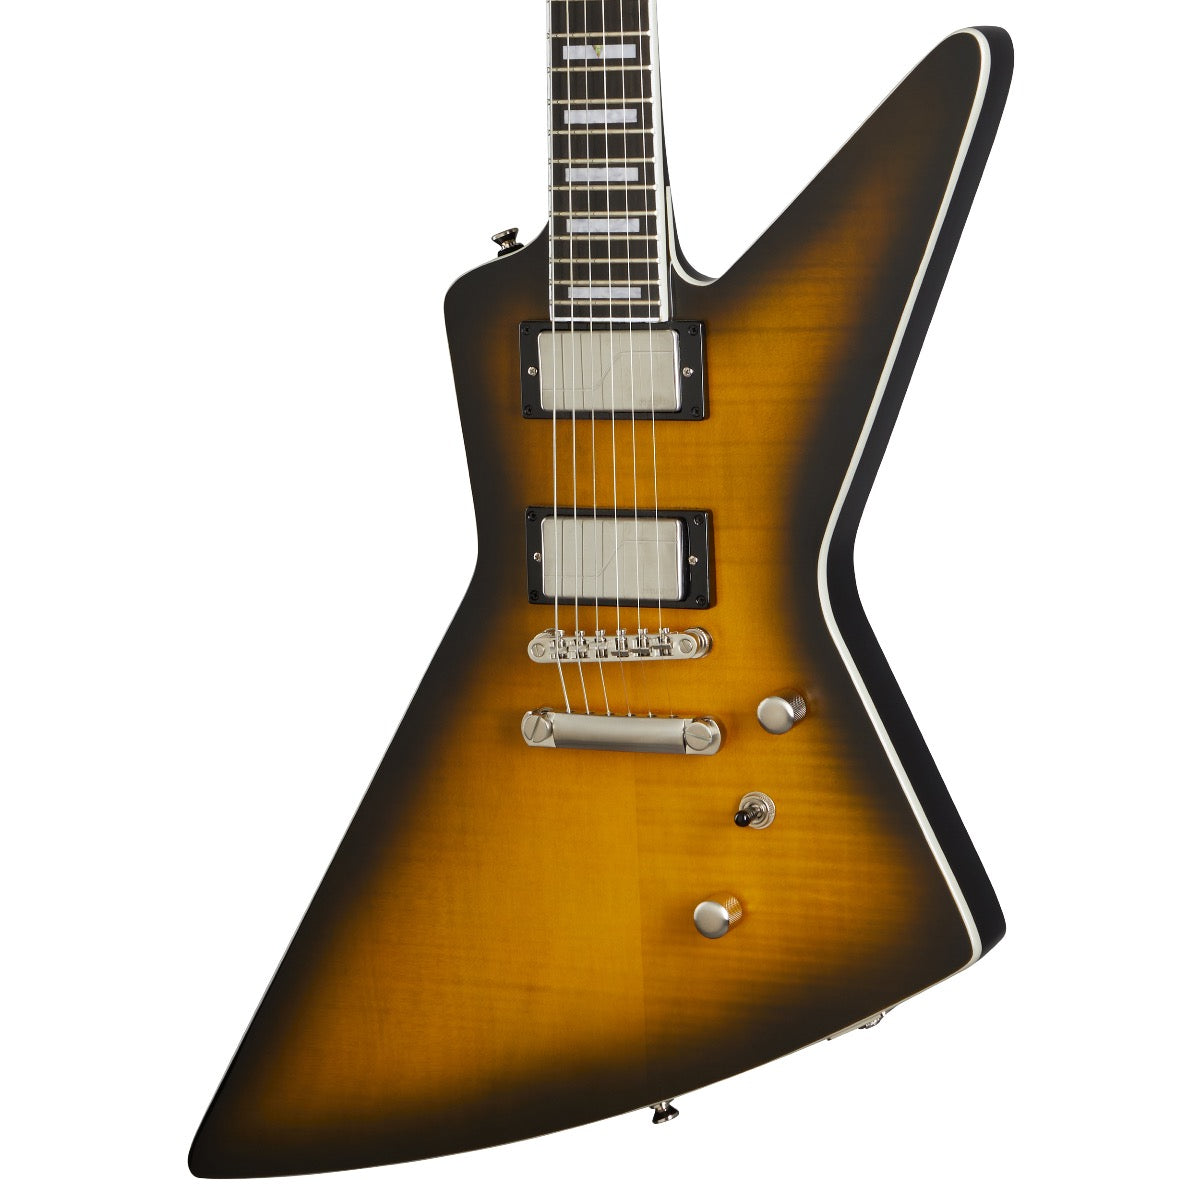 Epiphone Extura Prophecy Electric Guitar in Yellow Tiger Aged Gloss